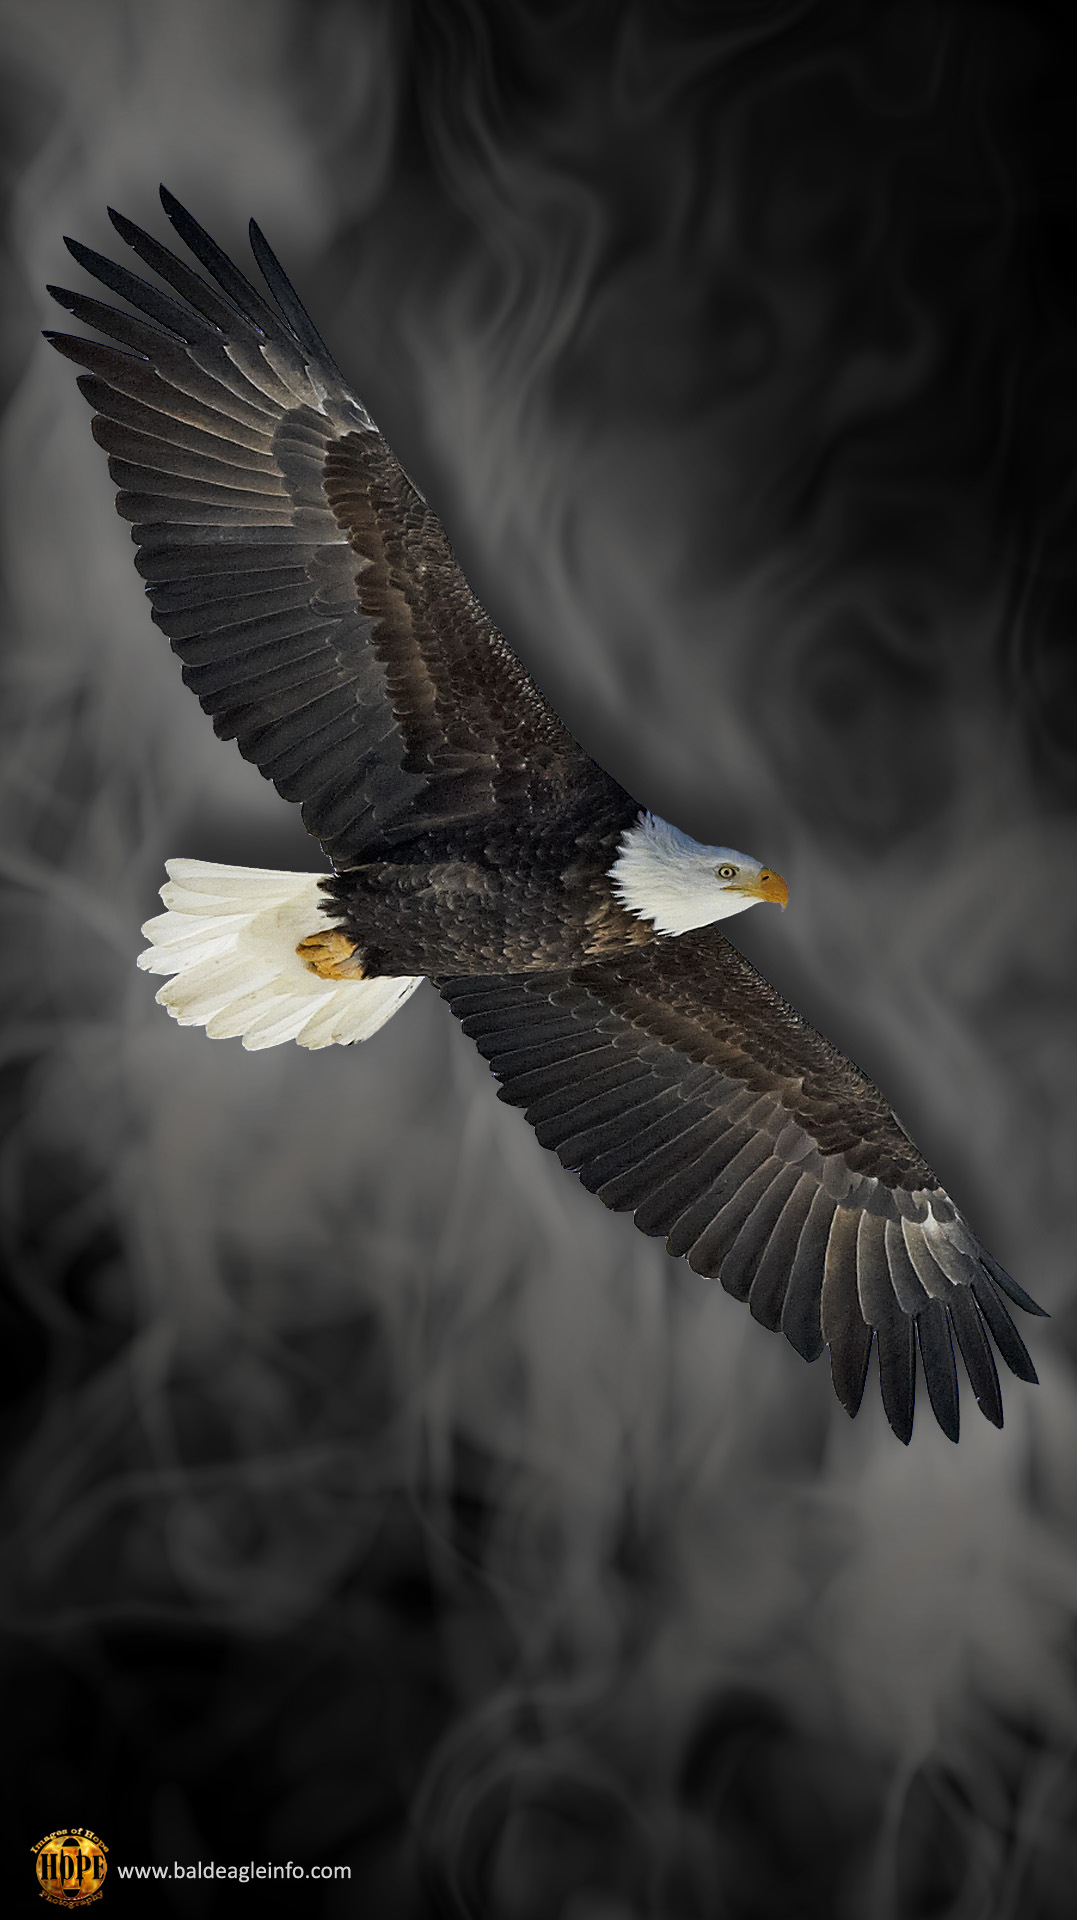 cool hd wallpapers for android phone,bald eagle,bird,bird of prey,eagle,accipitridae